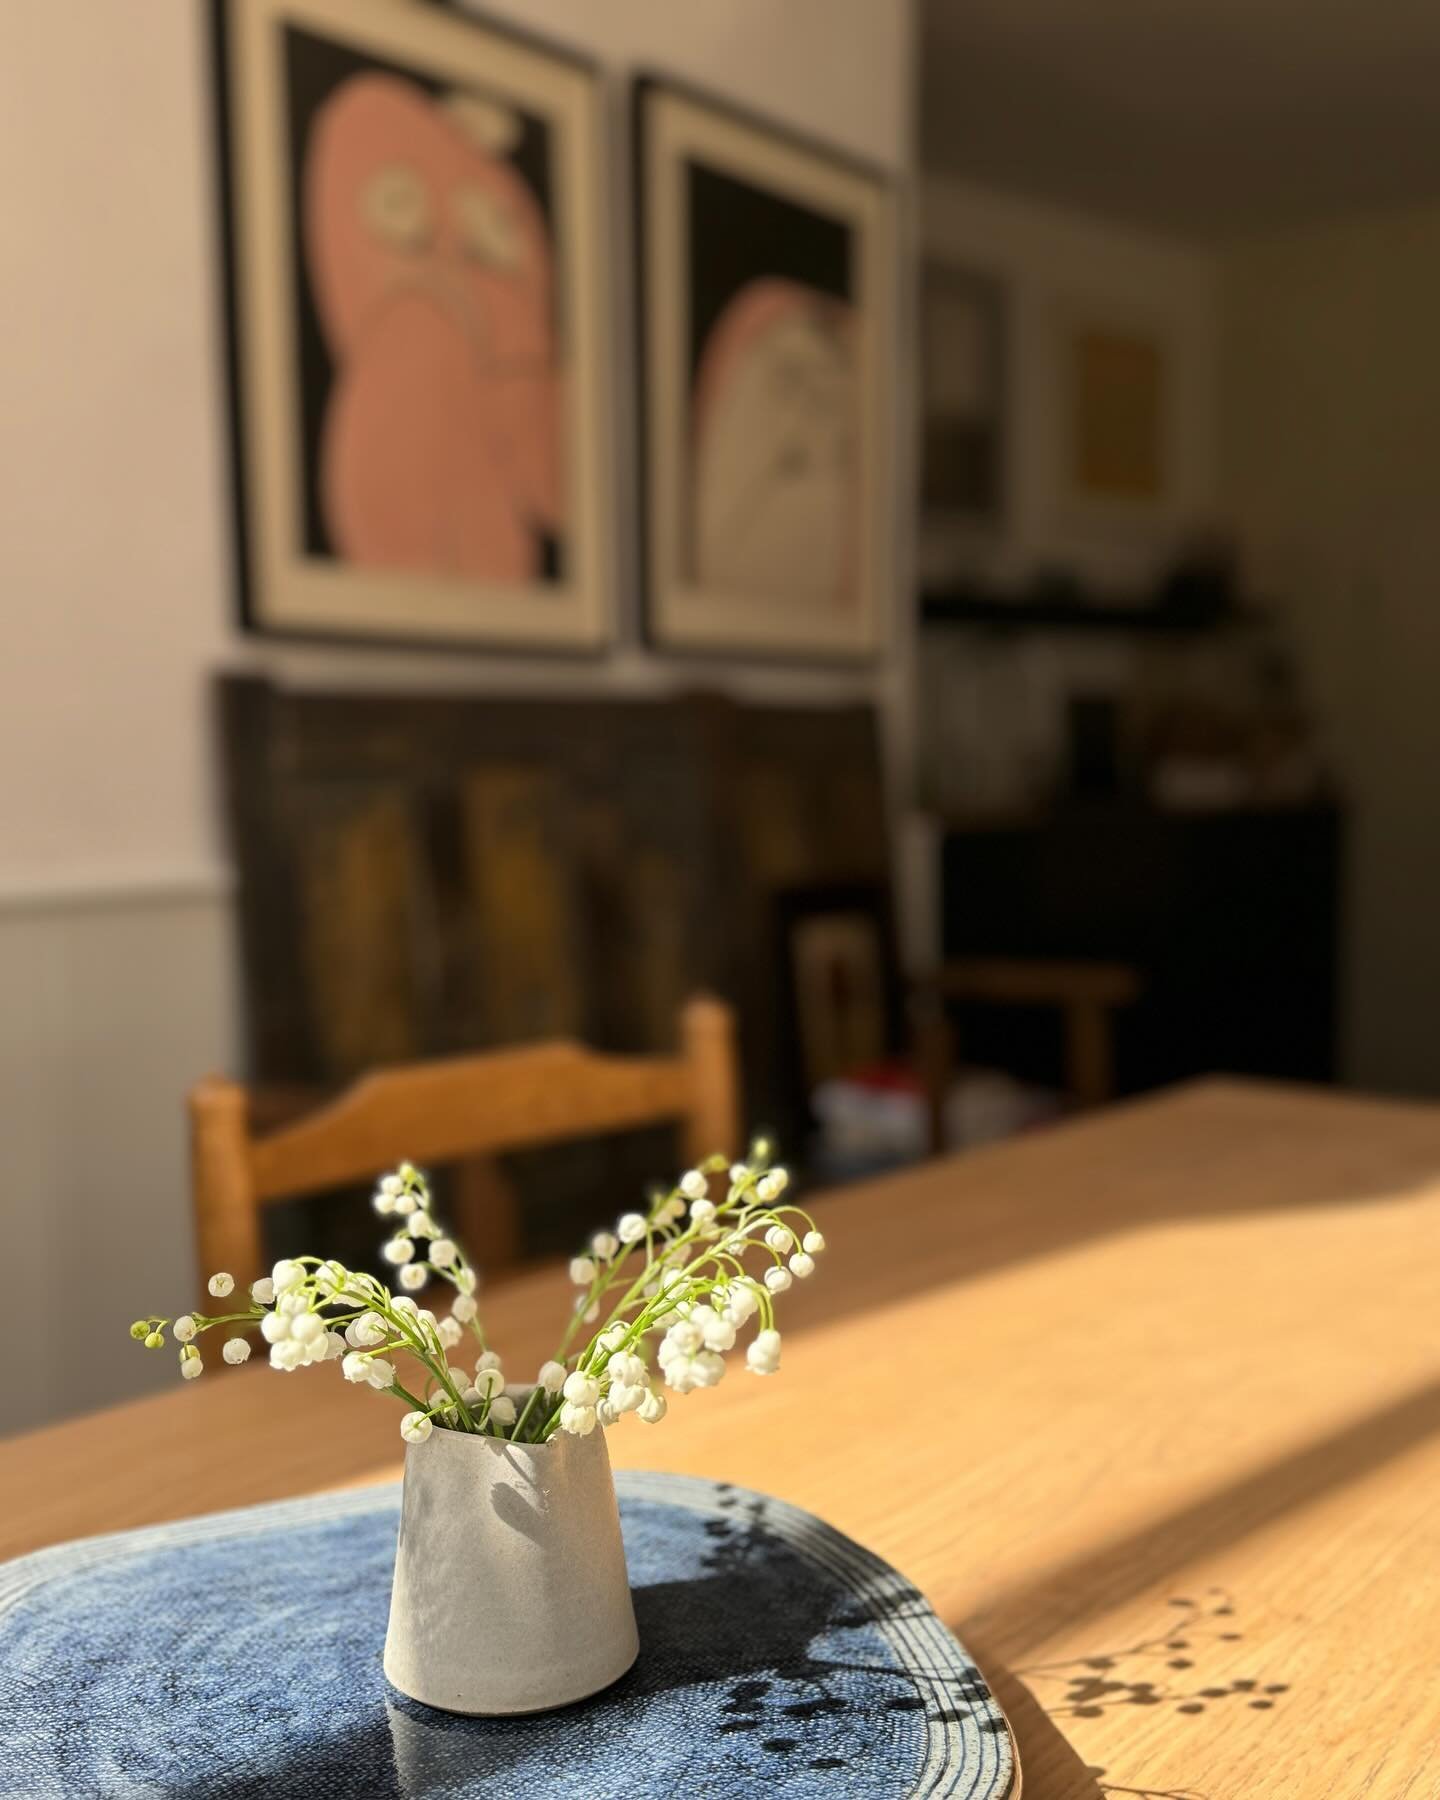 From the garden &hellip; Roger Cecil life paintings beyond &hellip;

Muguet is an emblem of purity, rebirth and joy 

Happy Sunday!
.
.
#happysunday #lilyofthevalley #muguet #rebirth #rogercecil #mycuratedhome #galleryownerslife #hayonwye #thetableha